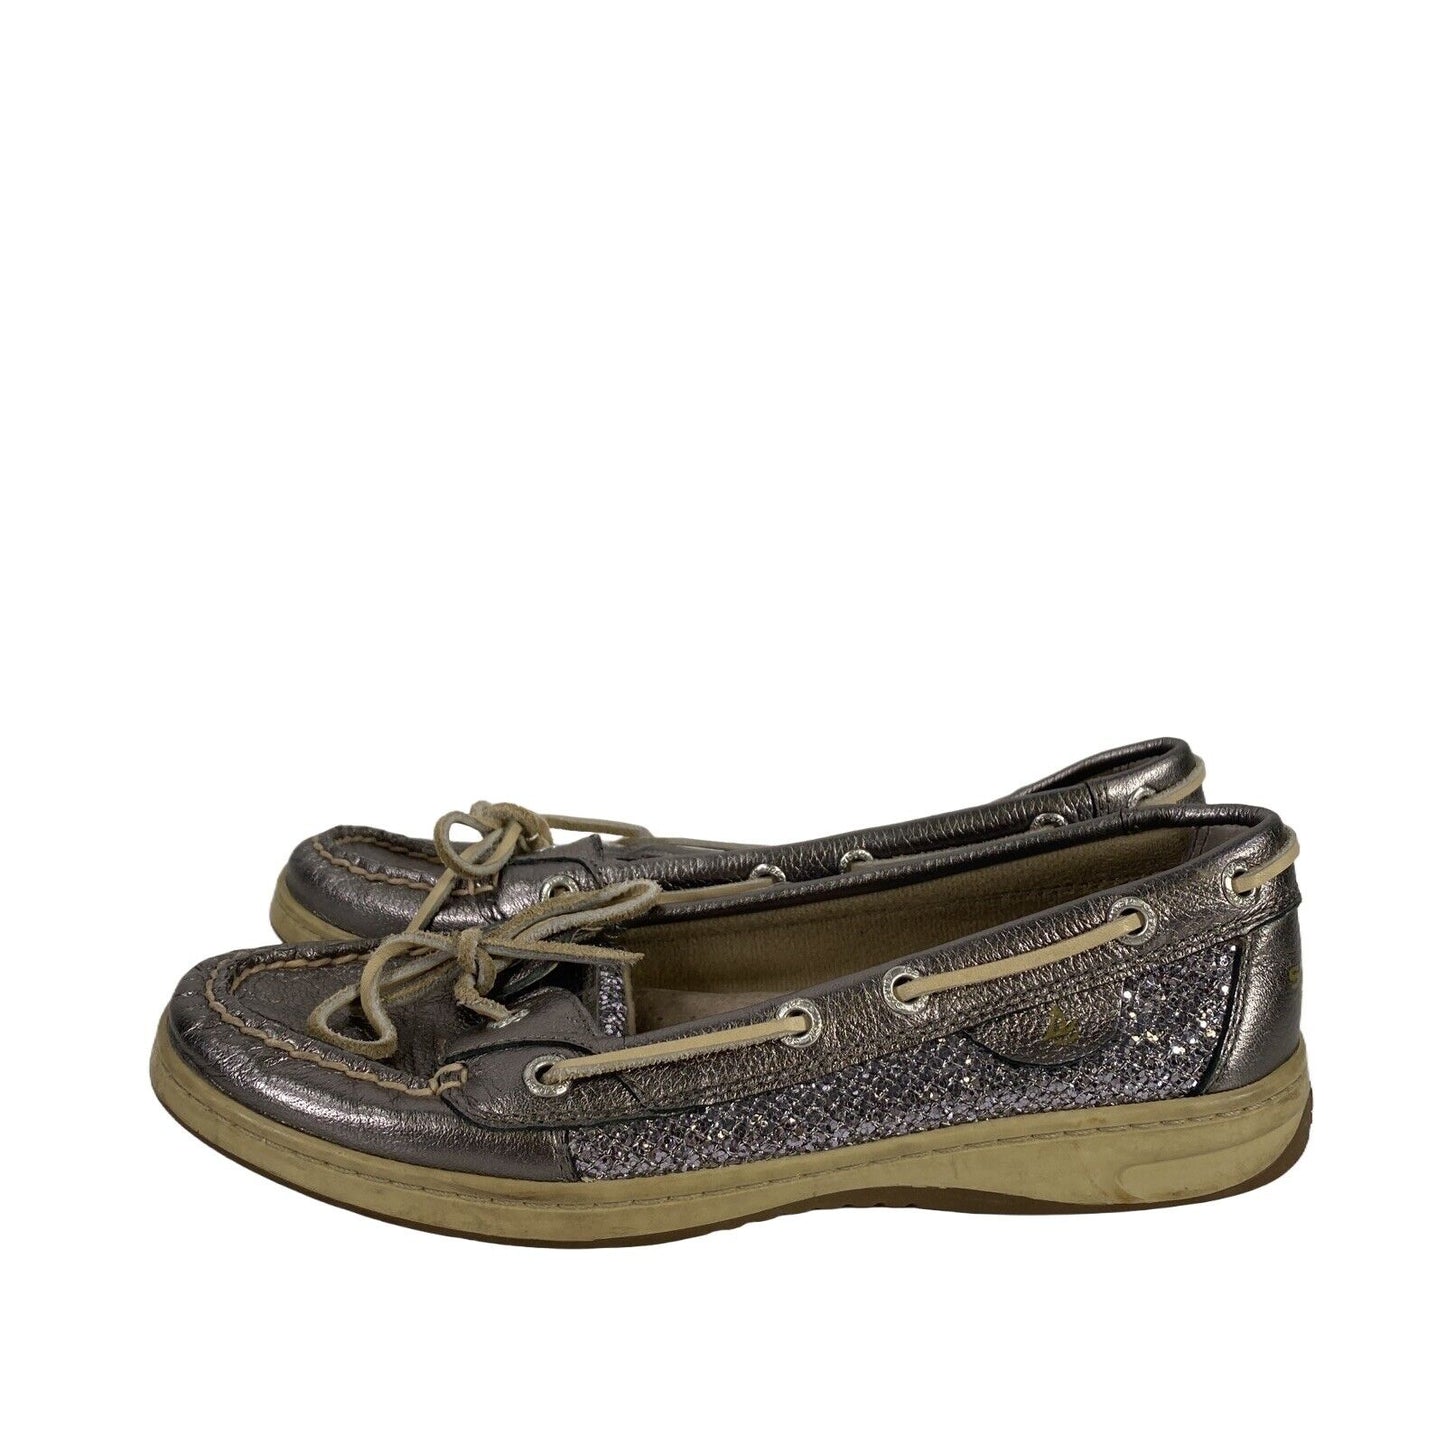 Sperry Women's Silver Glitter Leather Boat Shoes - 7.5 M